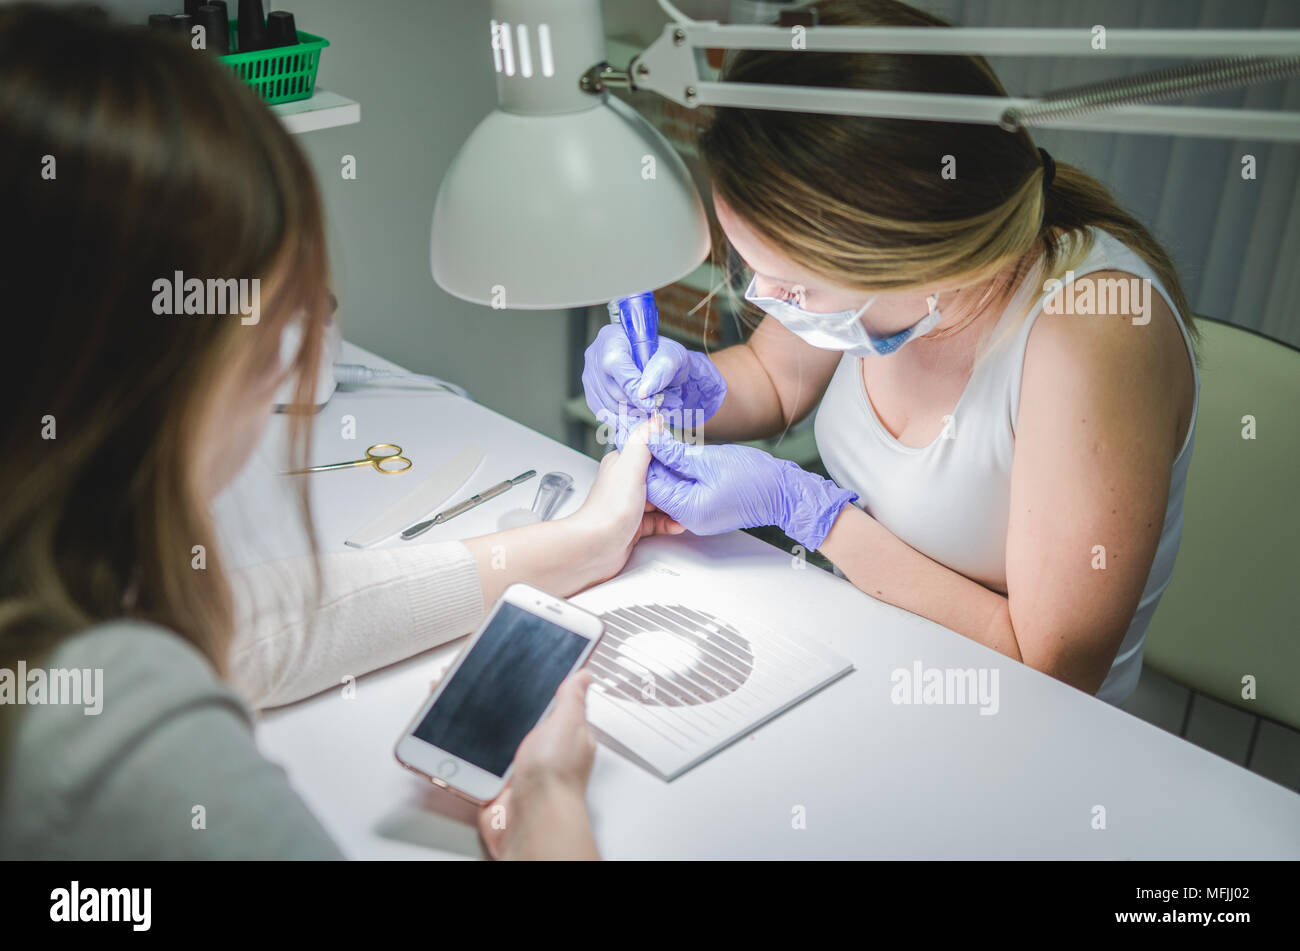 Beauty salon. Professional manicure procedure. Smartphone in hands of client Stock Photo